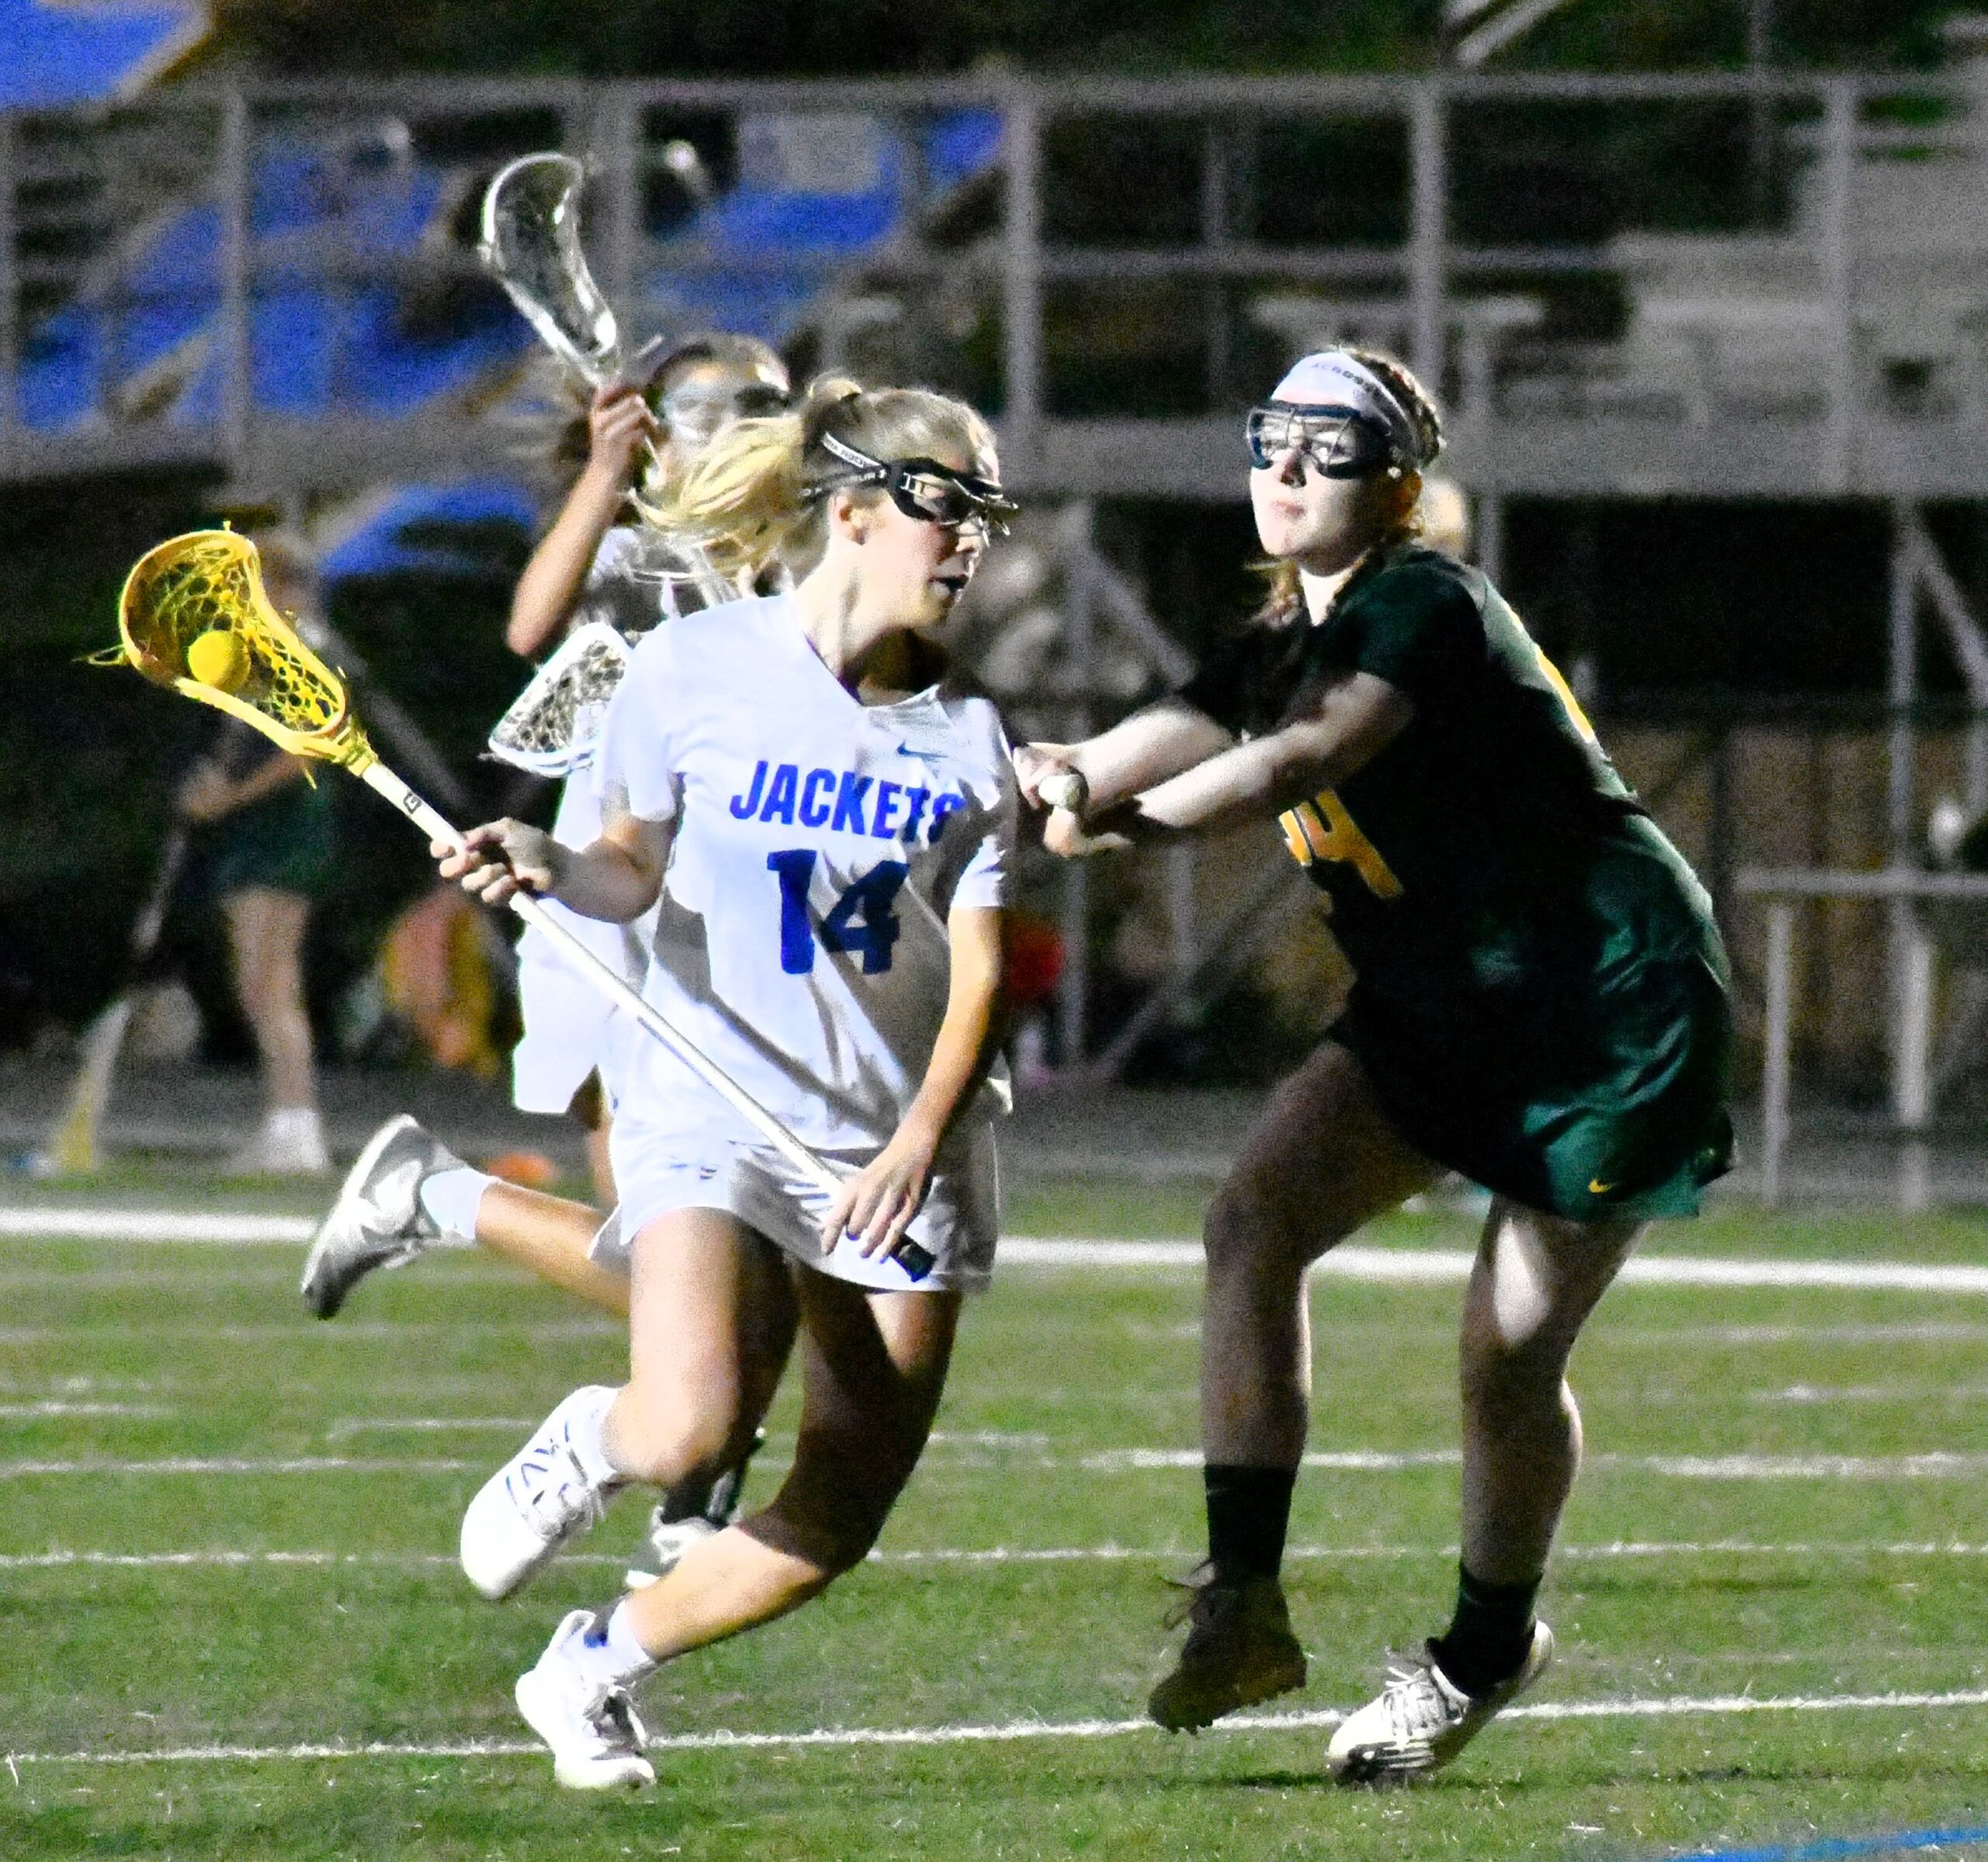 Fort Mill lacrosse dominant in win over Spring Valley (March 4 Roundup)